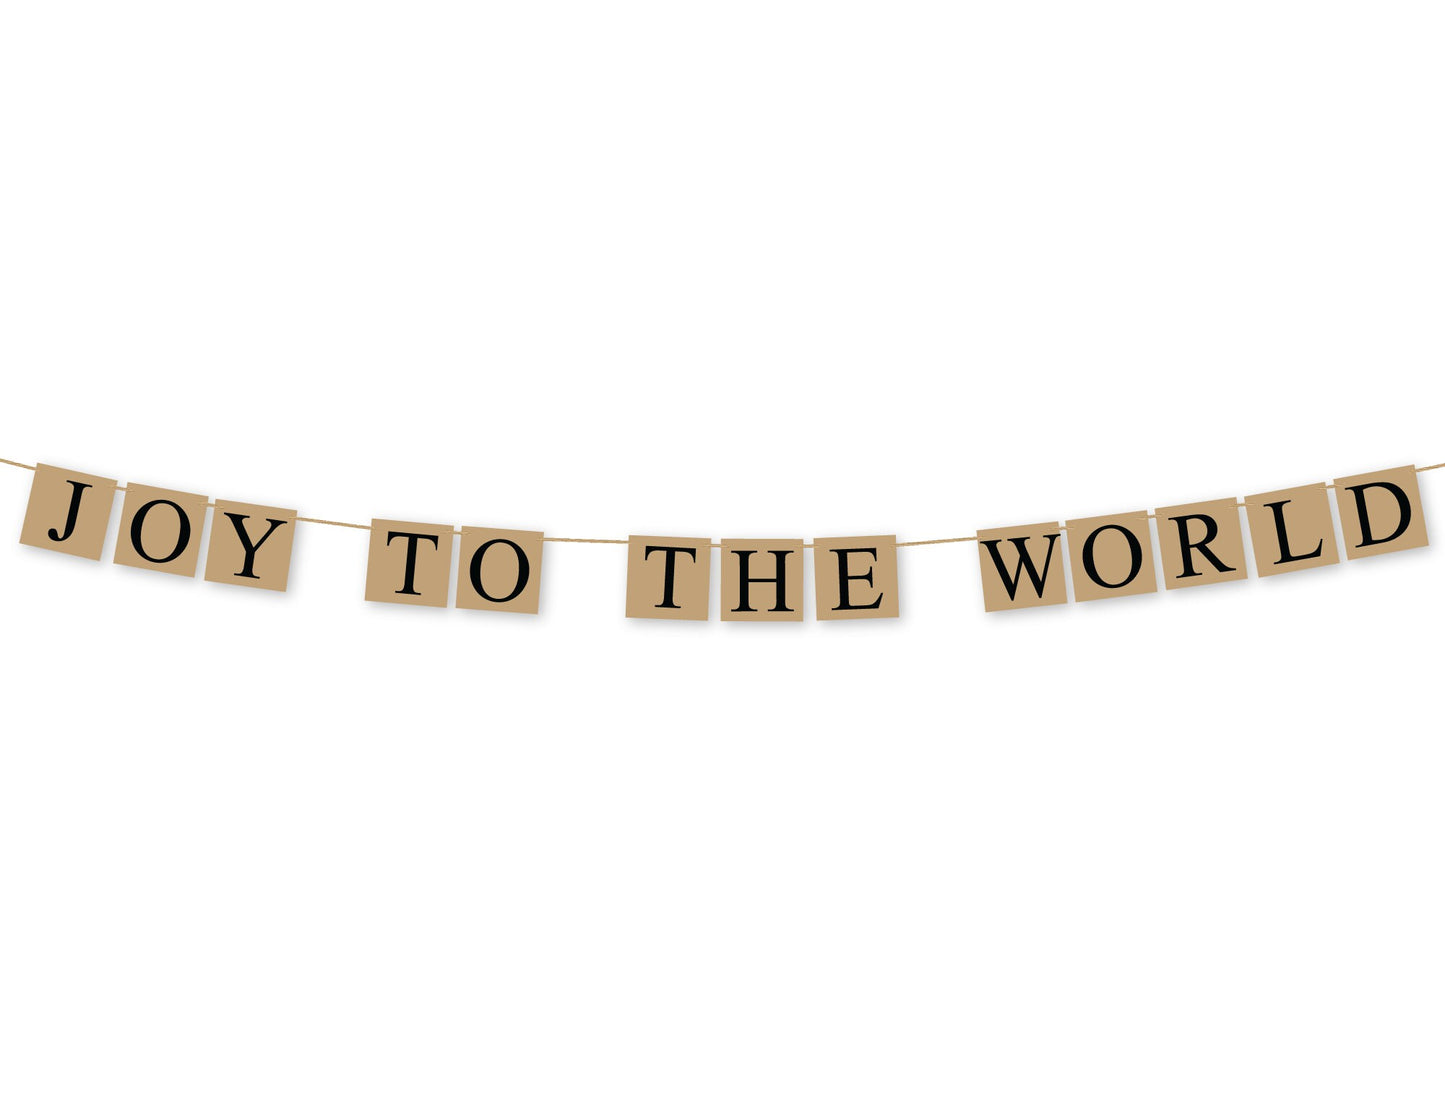 Joy to the World Banner, rustic Christmas decorations, Christmas banner farmhouse holiday decor sign, Christmas mantel garland for fireplace